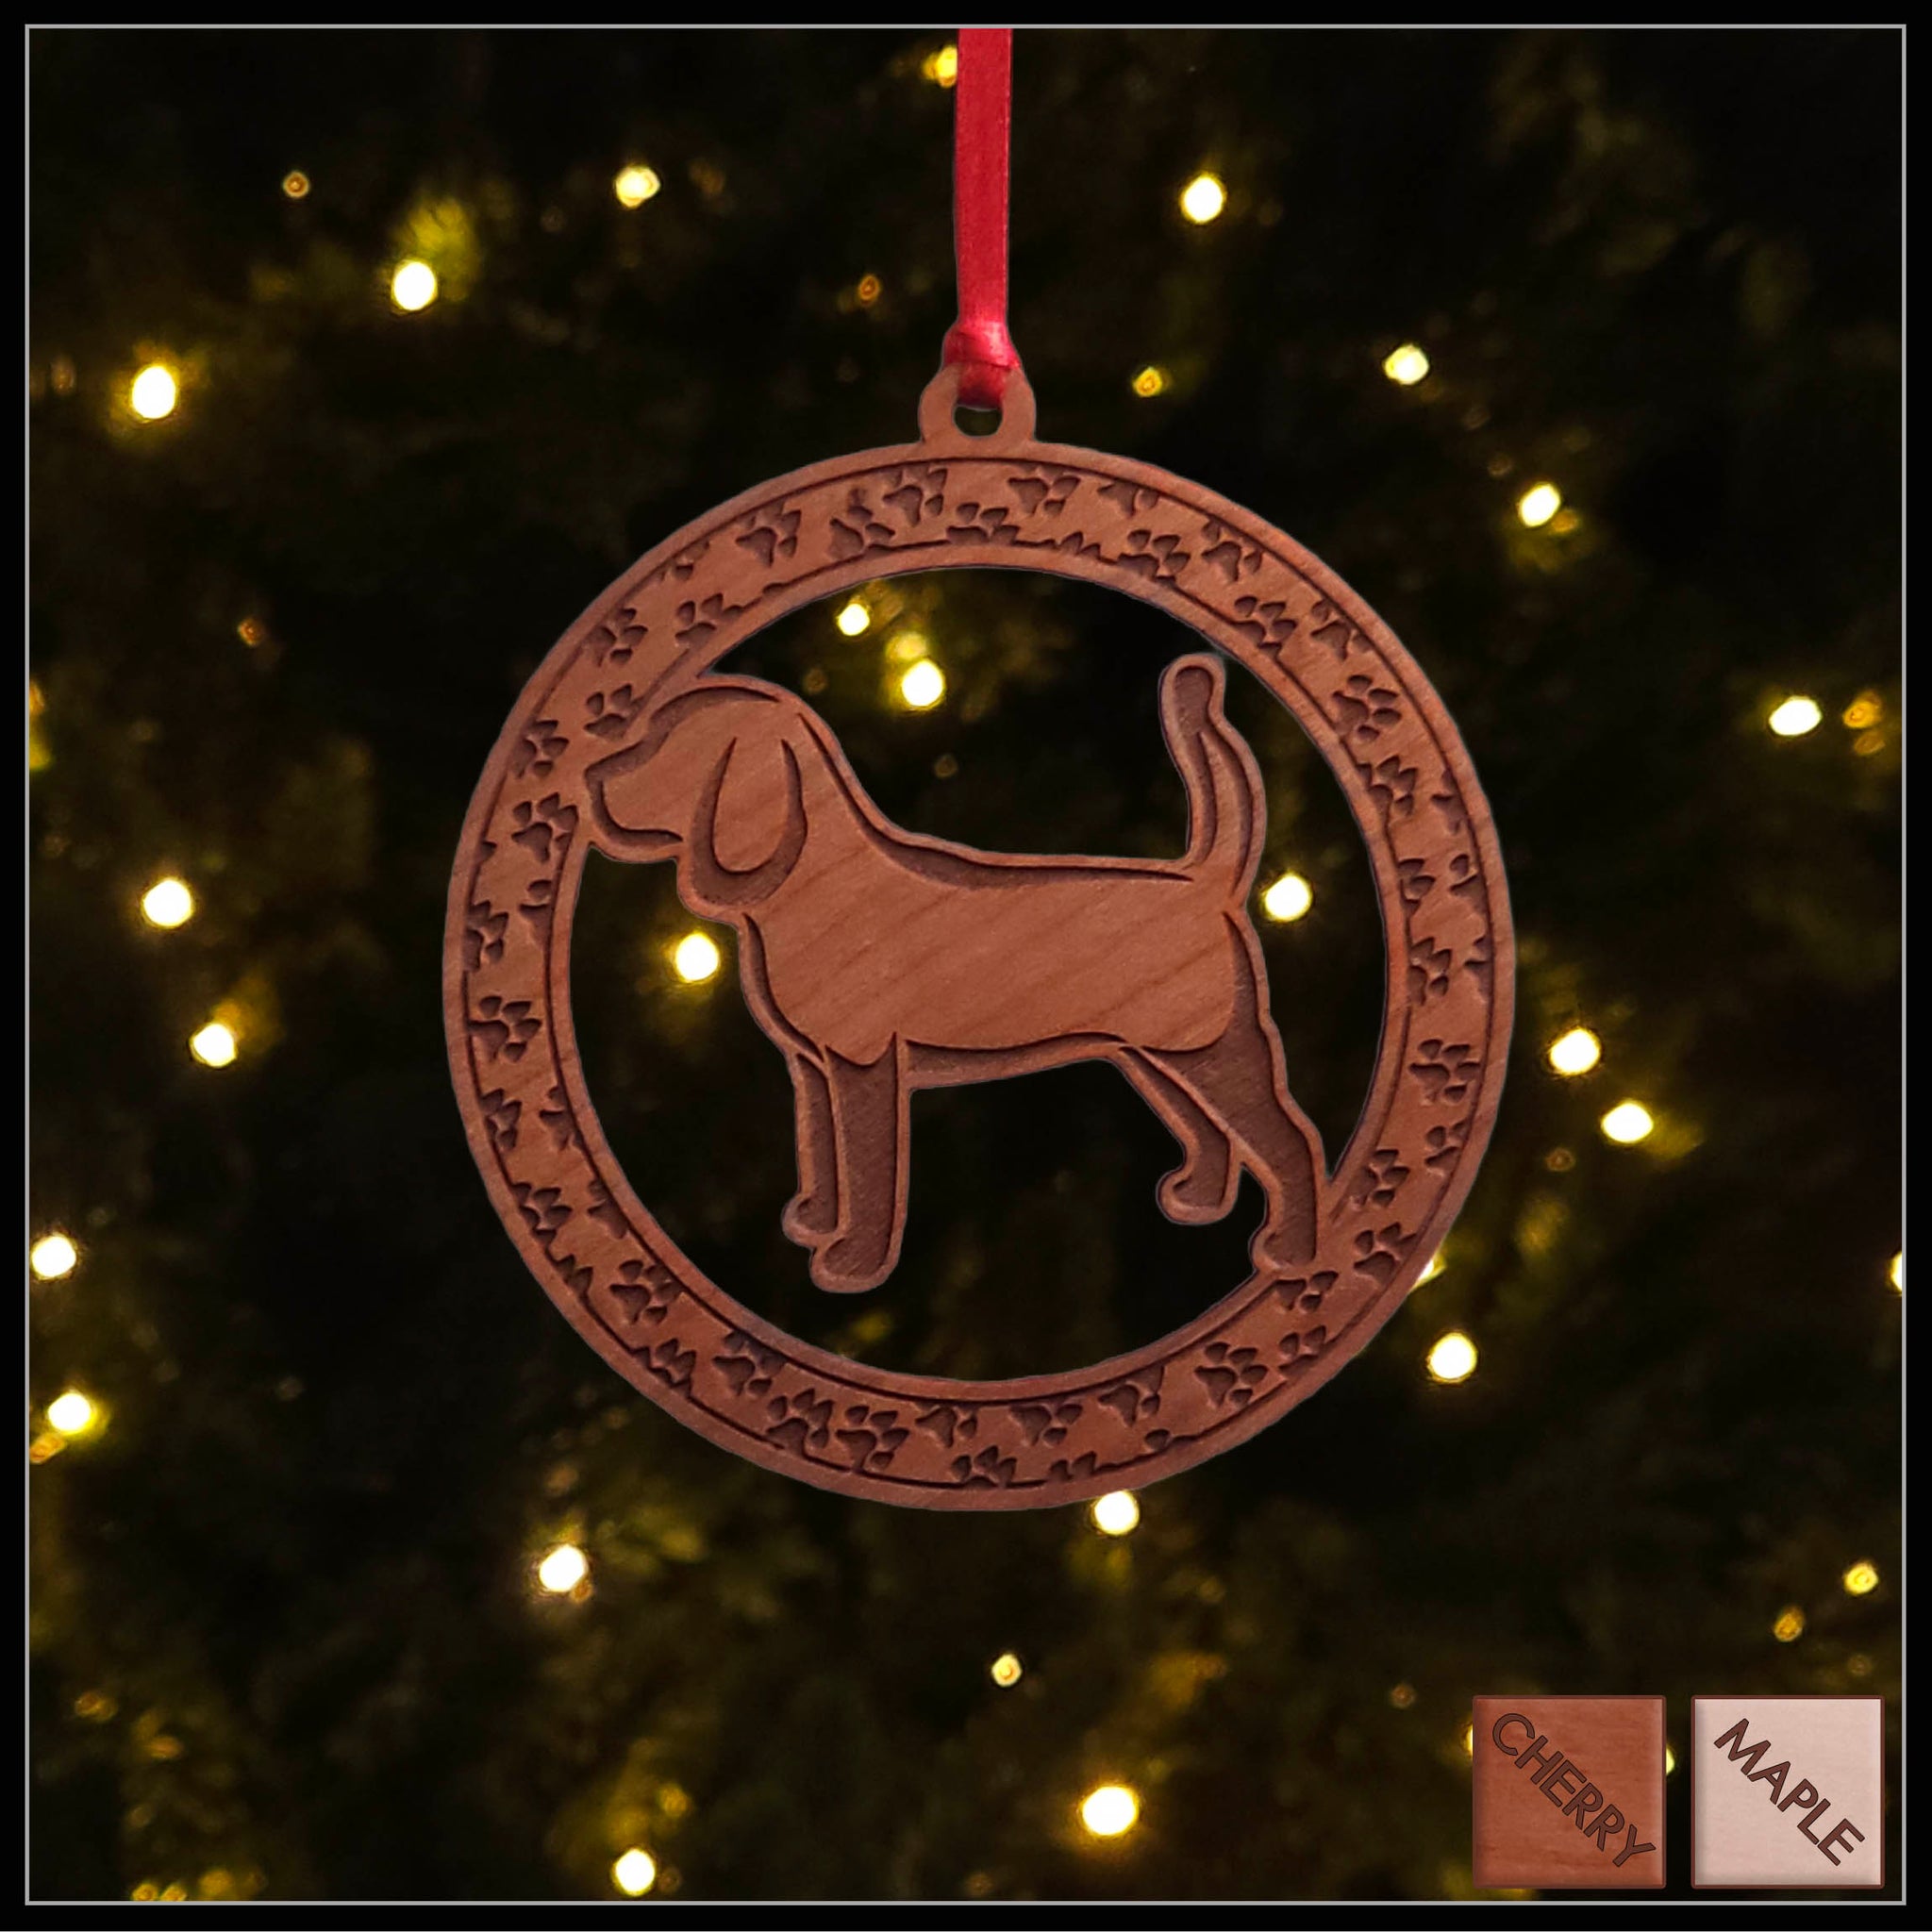 A round cherry wood veneer ornament with a border of small paw prints. The center of the ornament is a beagle dog